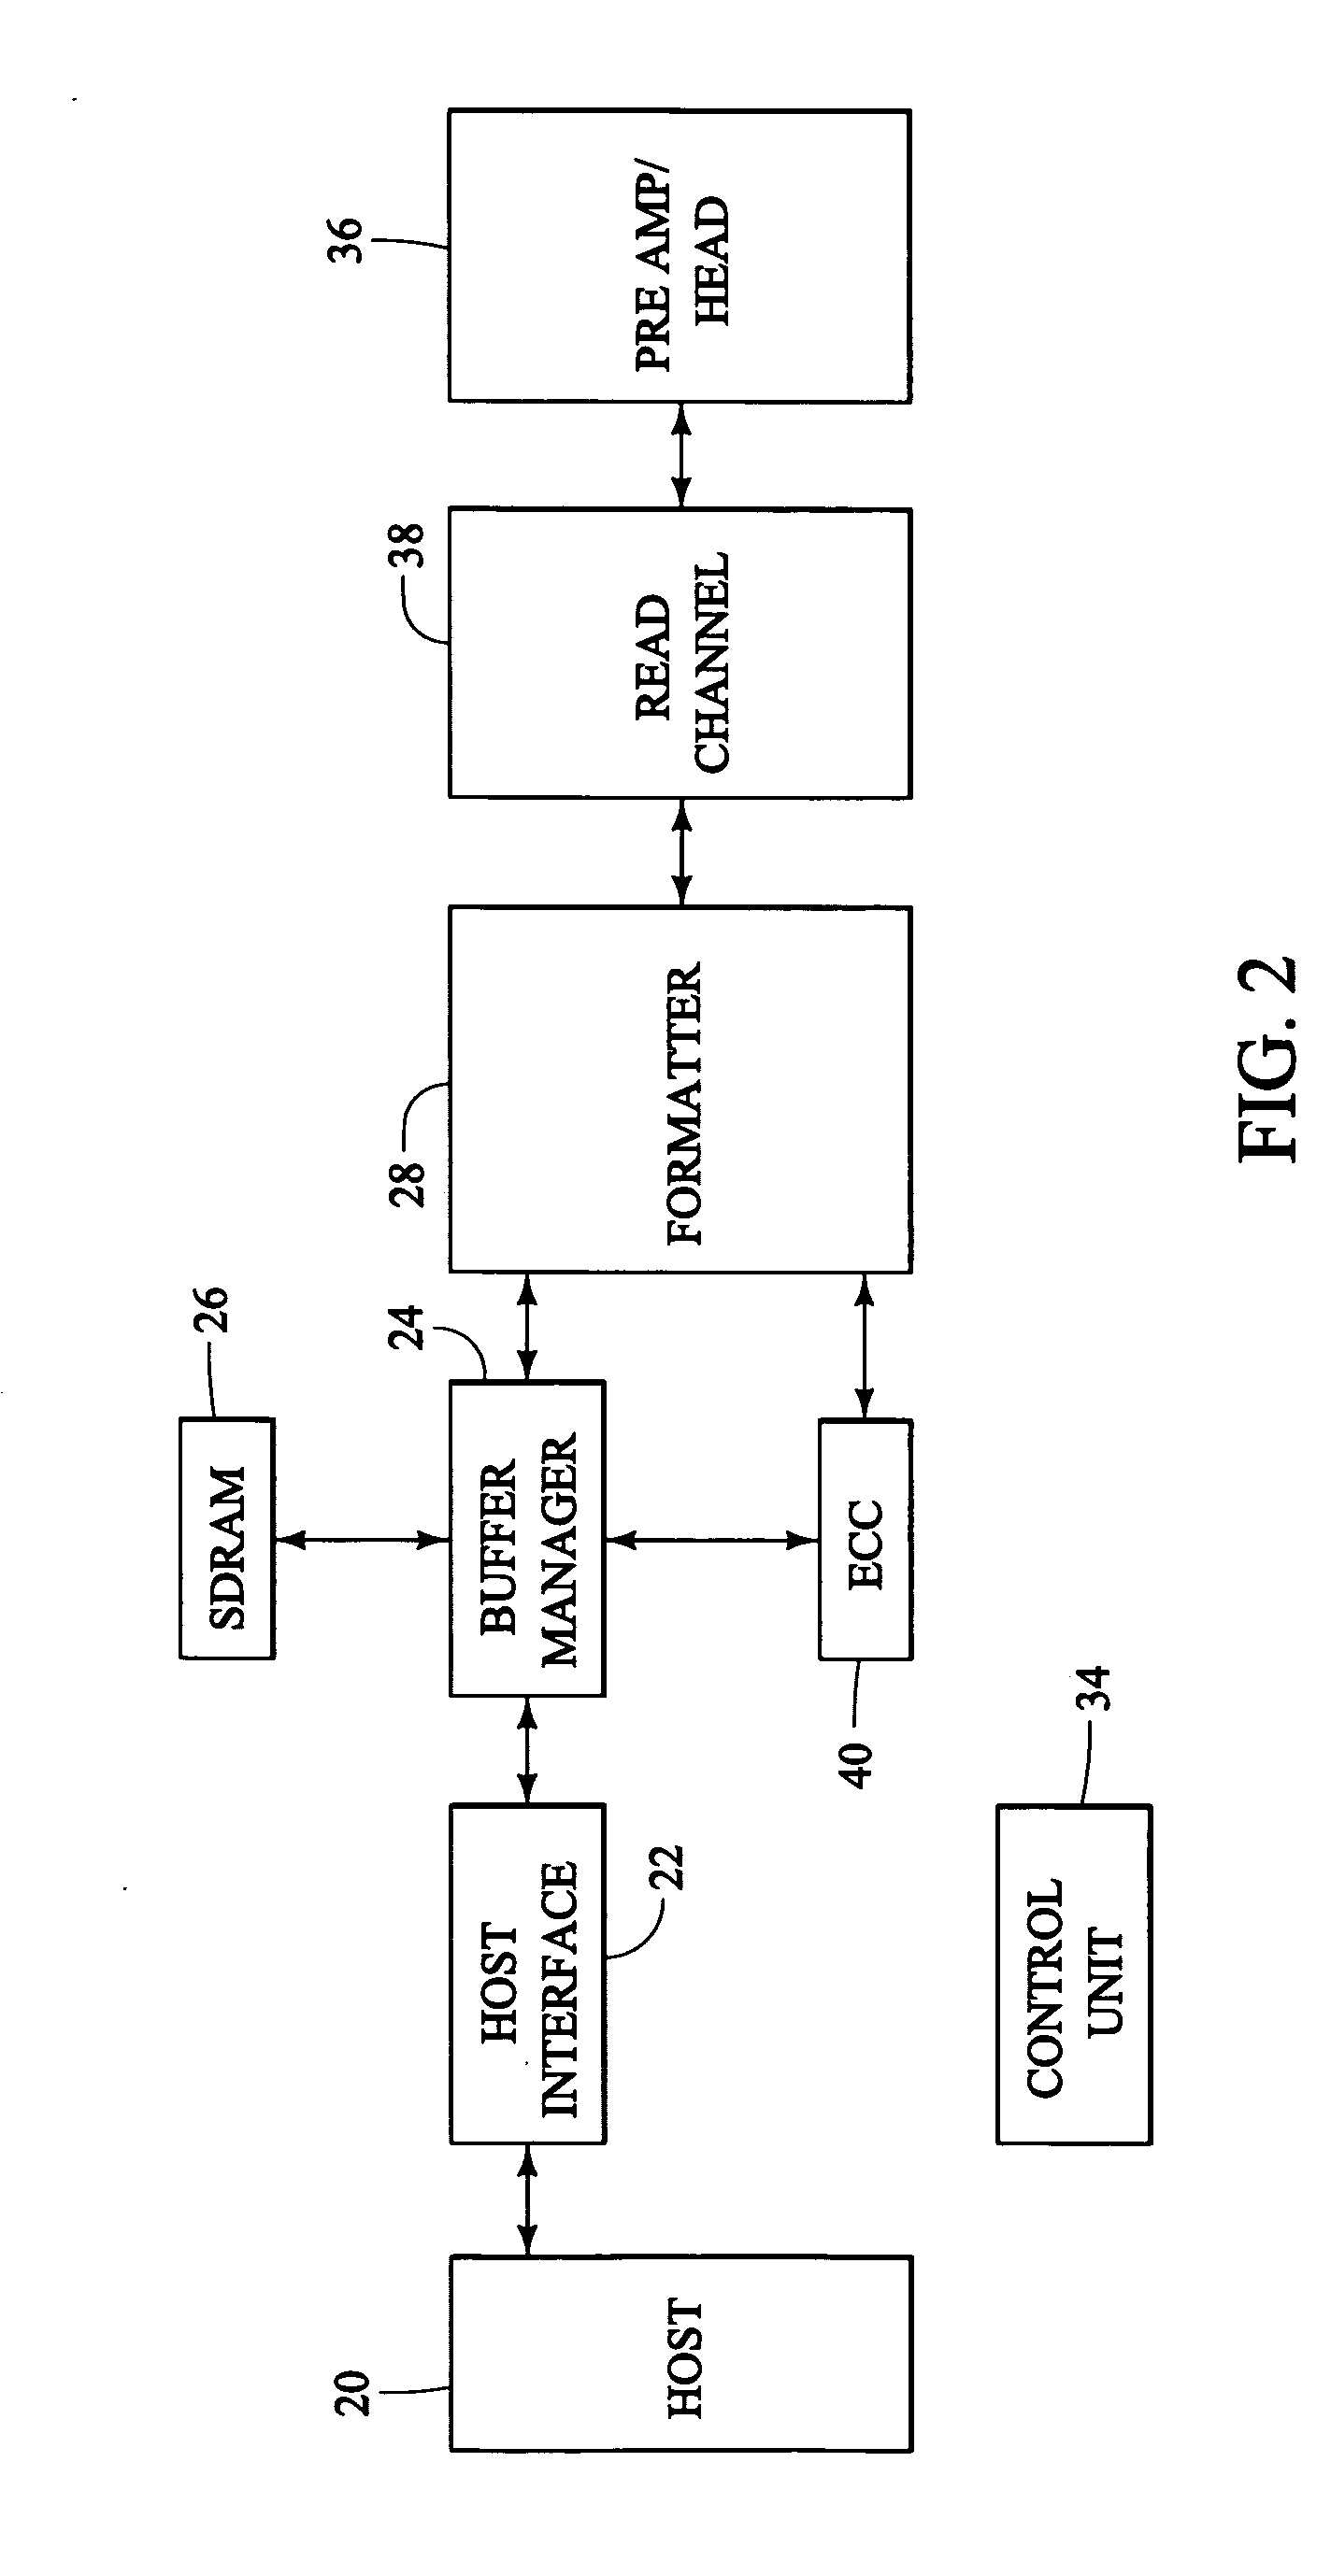 Methods and apparatus for correcting errors in data read from a disk drive